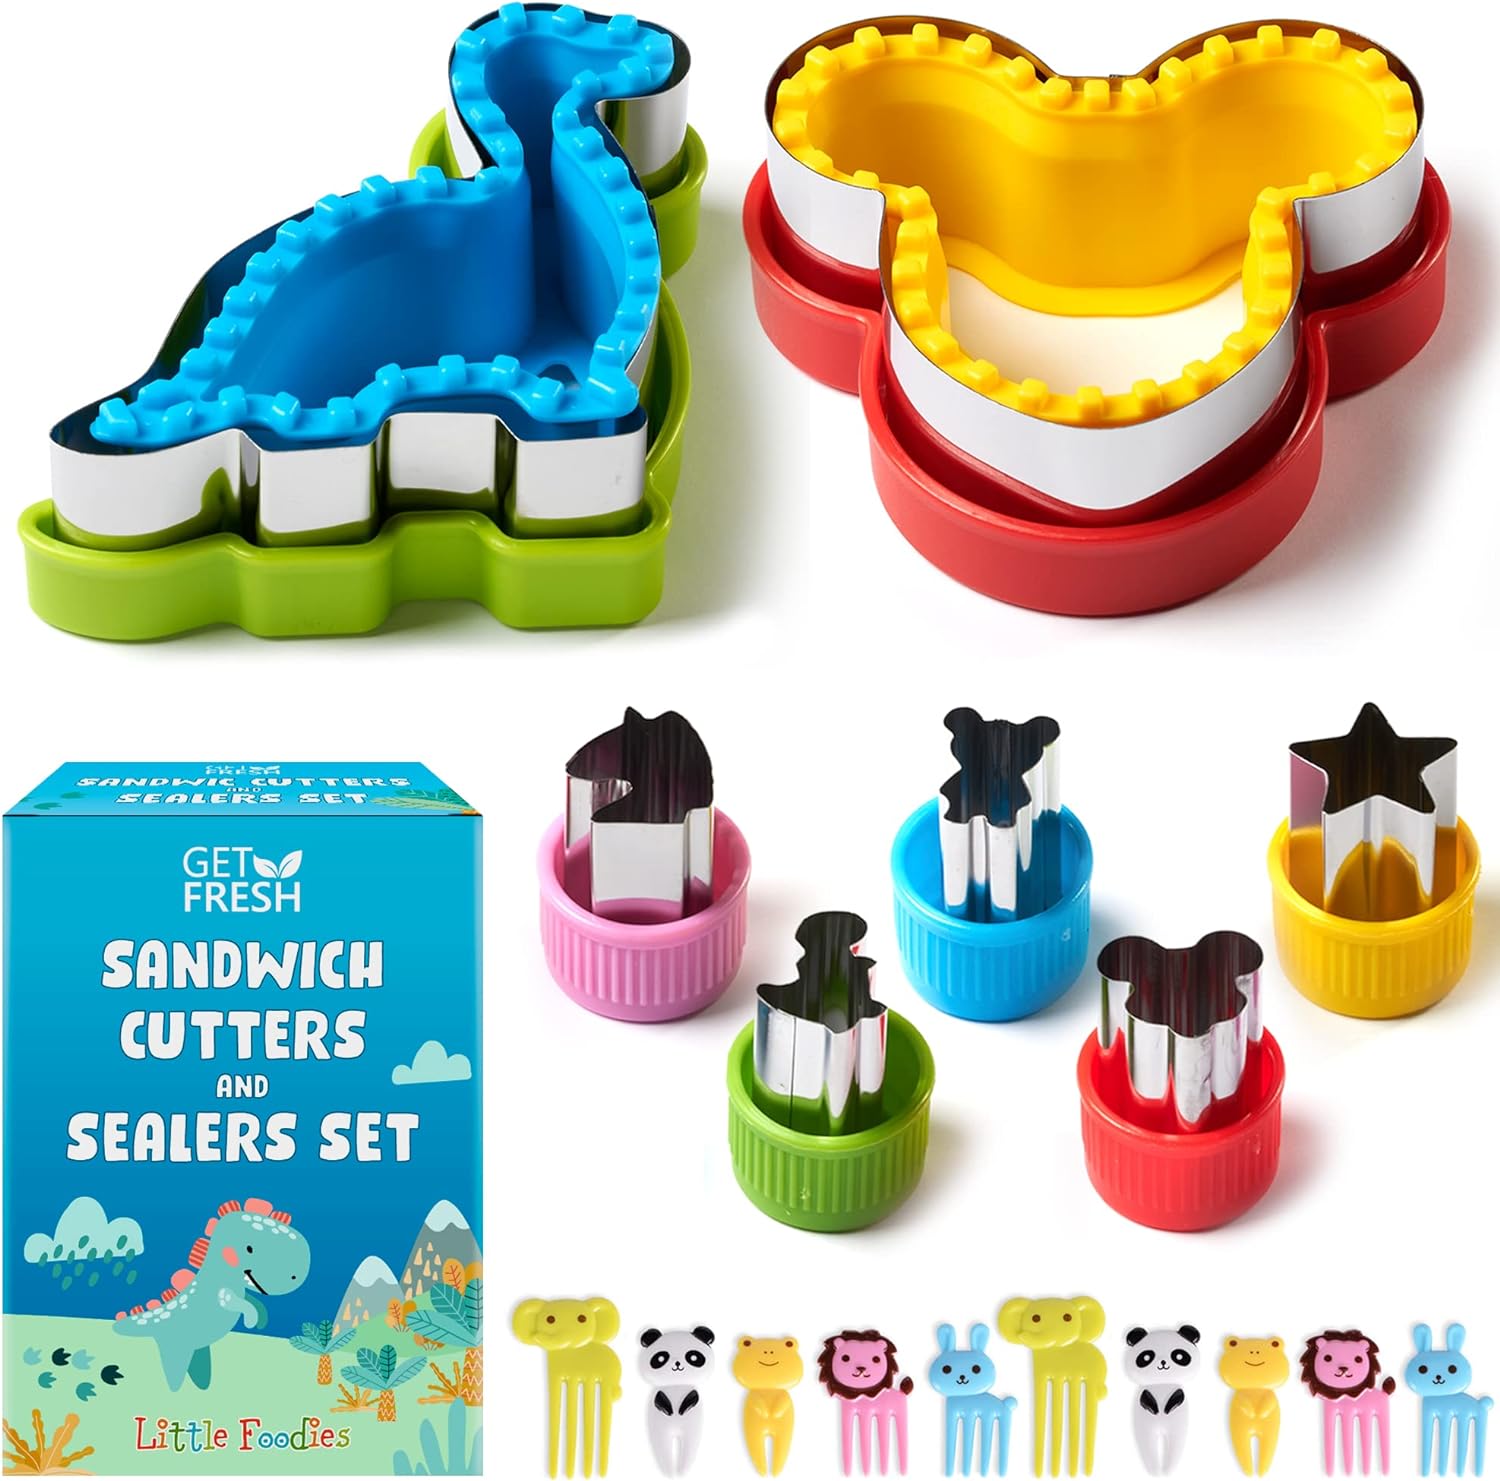 17-pcs Stainless Steel Sandwich Sealers and Veggie Cutters for Kids